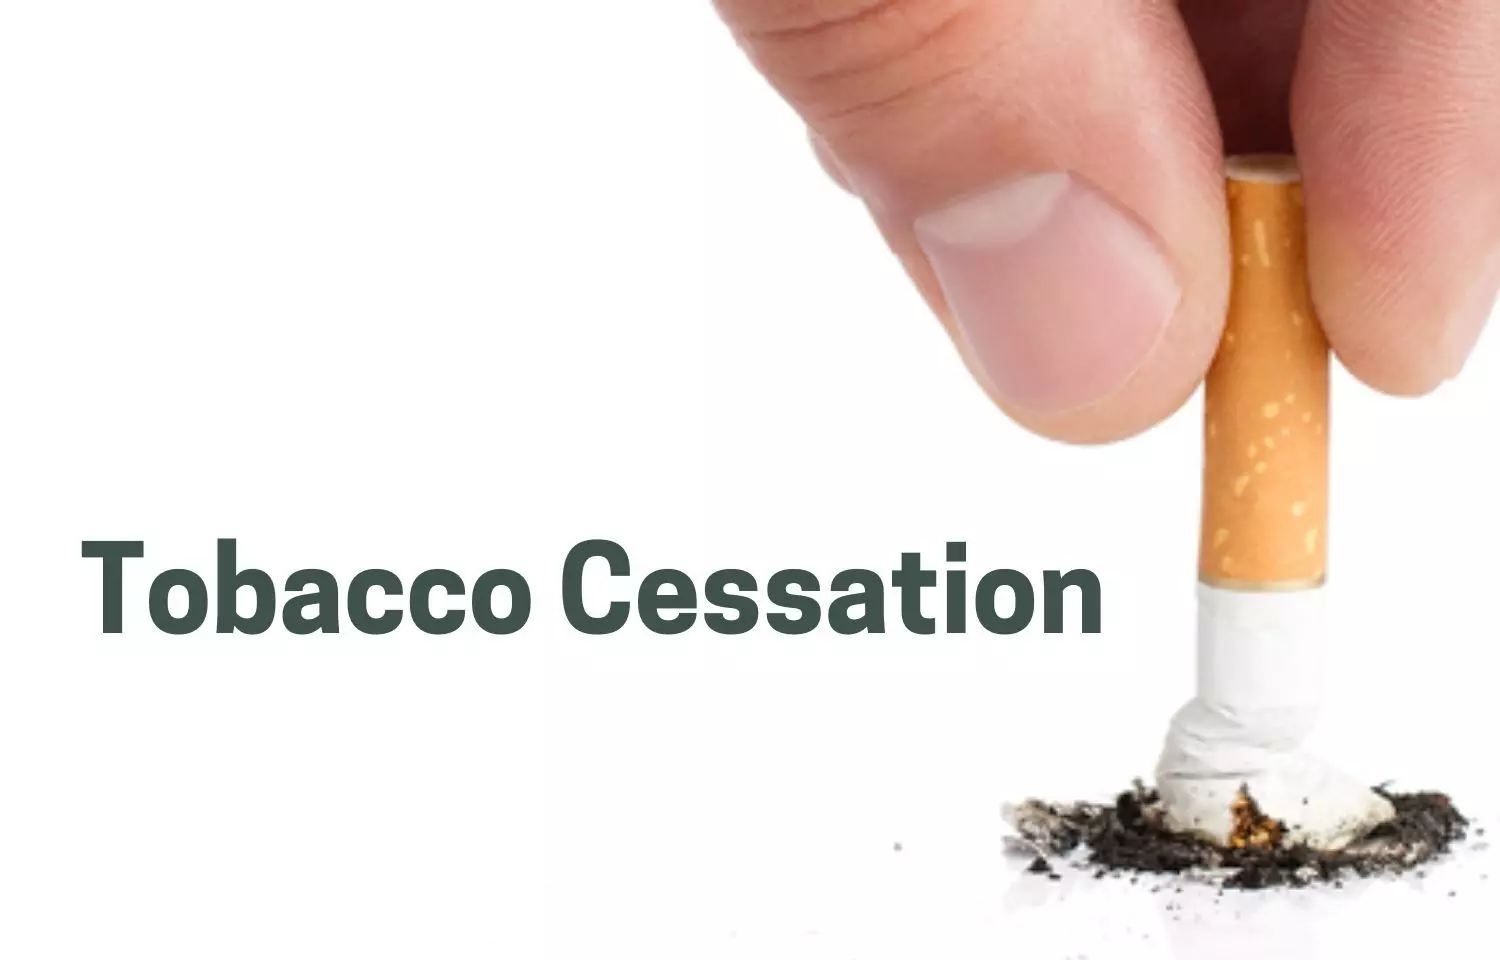 DCI issues reference manual for dental professionals for tobacco cessation in dental settings, notifies institutes